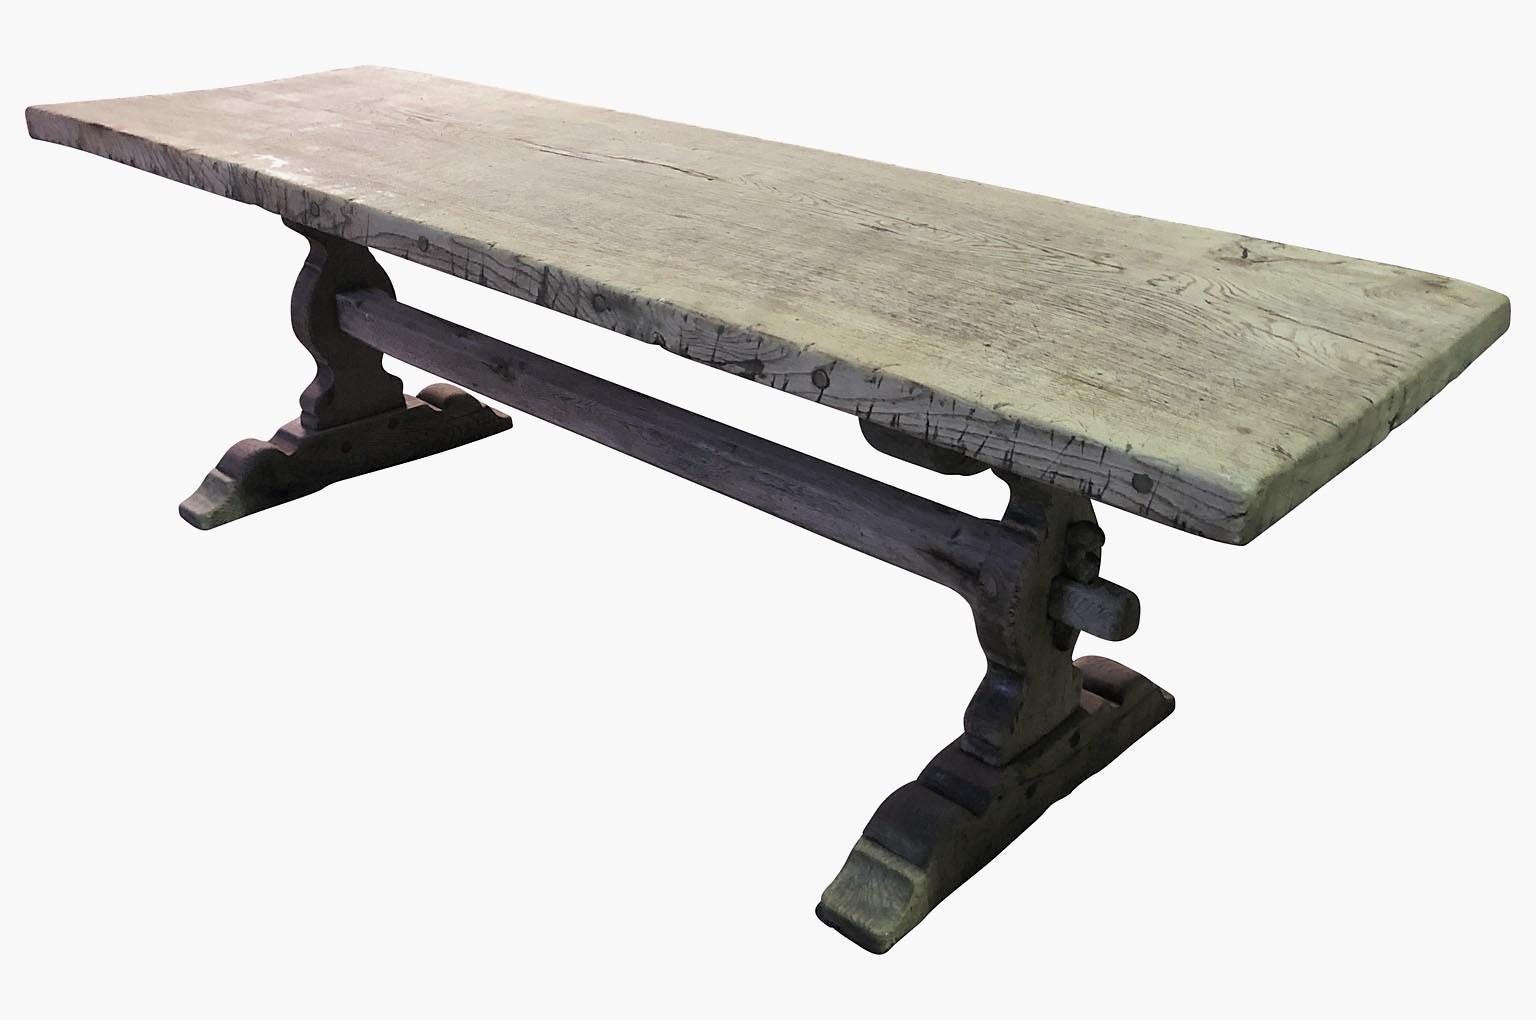 A wonderful mid-19th century farm table - Trestle table from the Provence region of France. Soundly constructed from washed oak with beautifully sculpted legs and a very thick solid board top. Great patina.